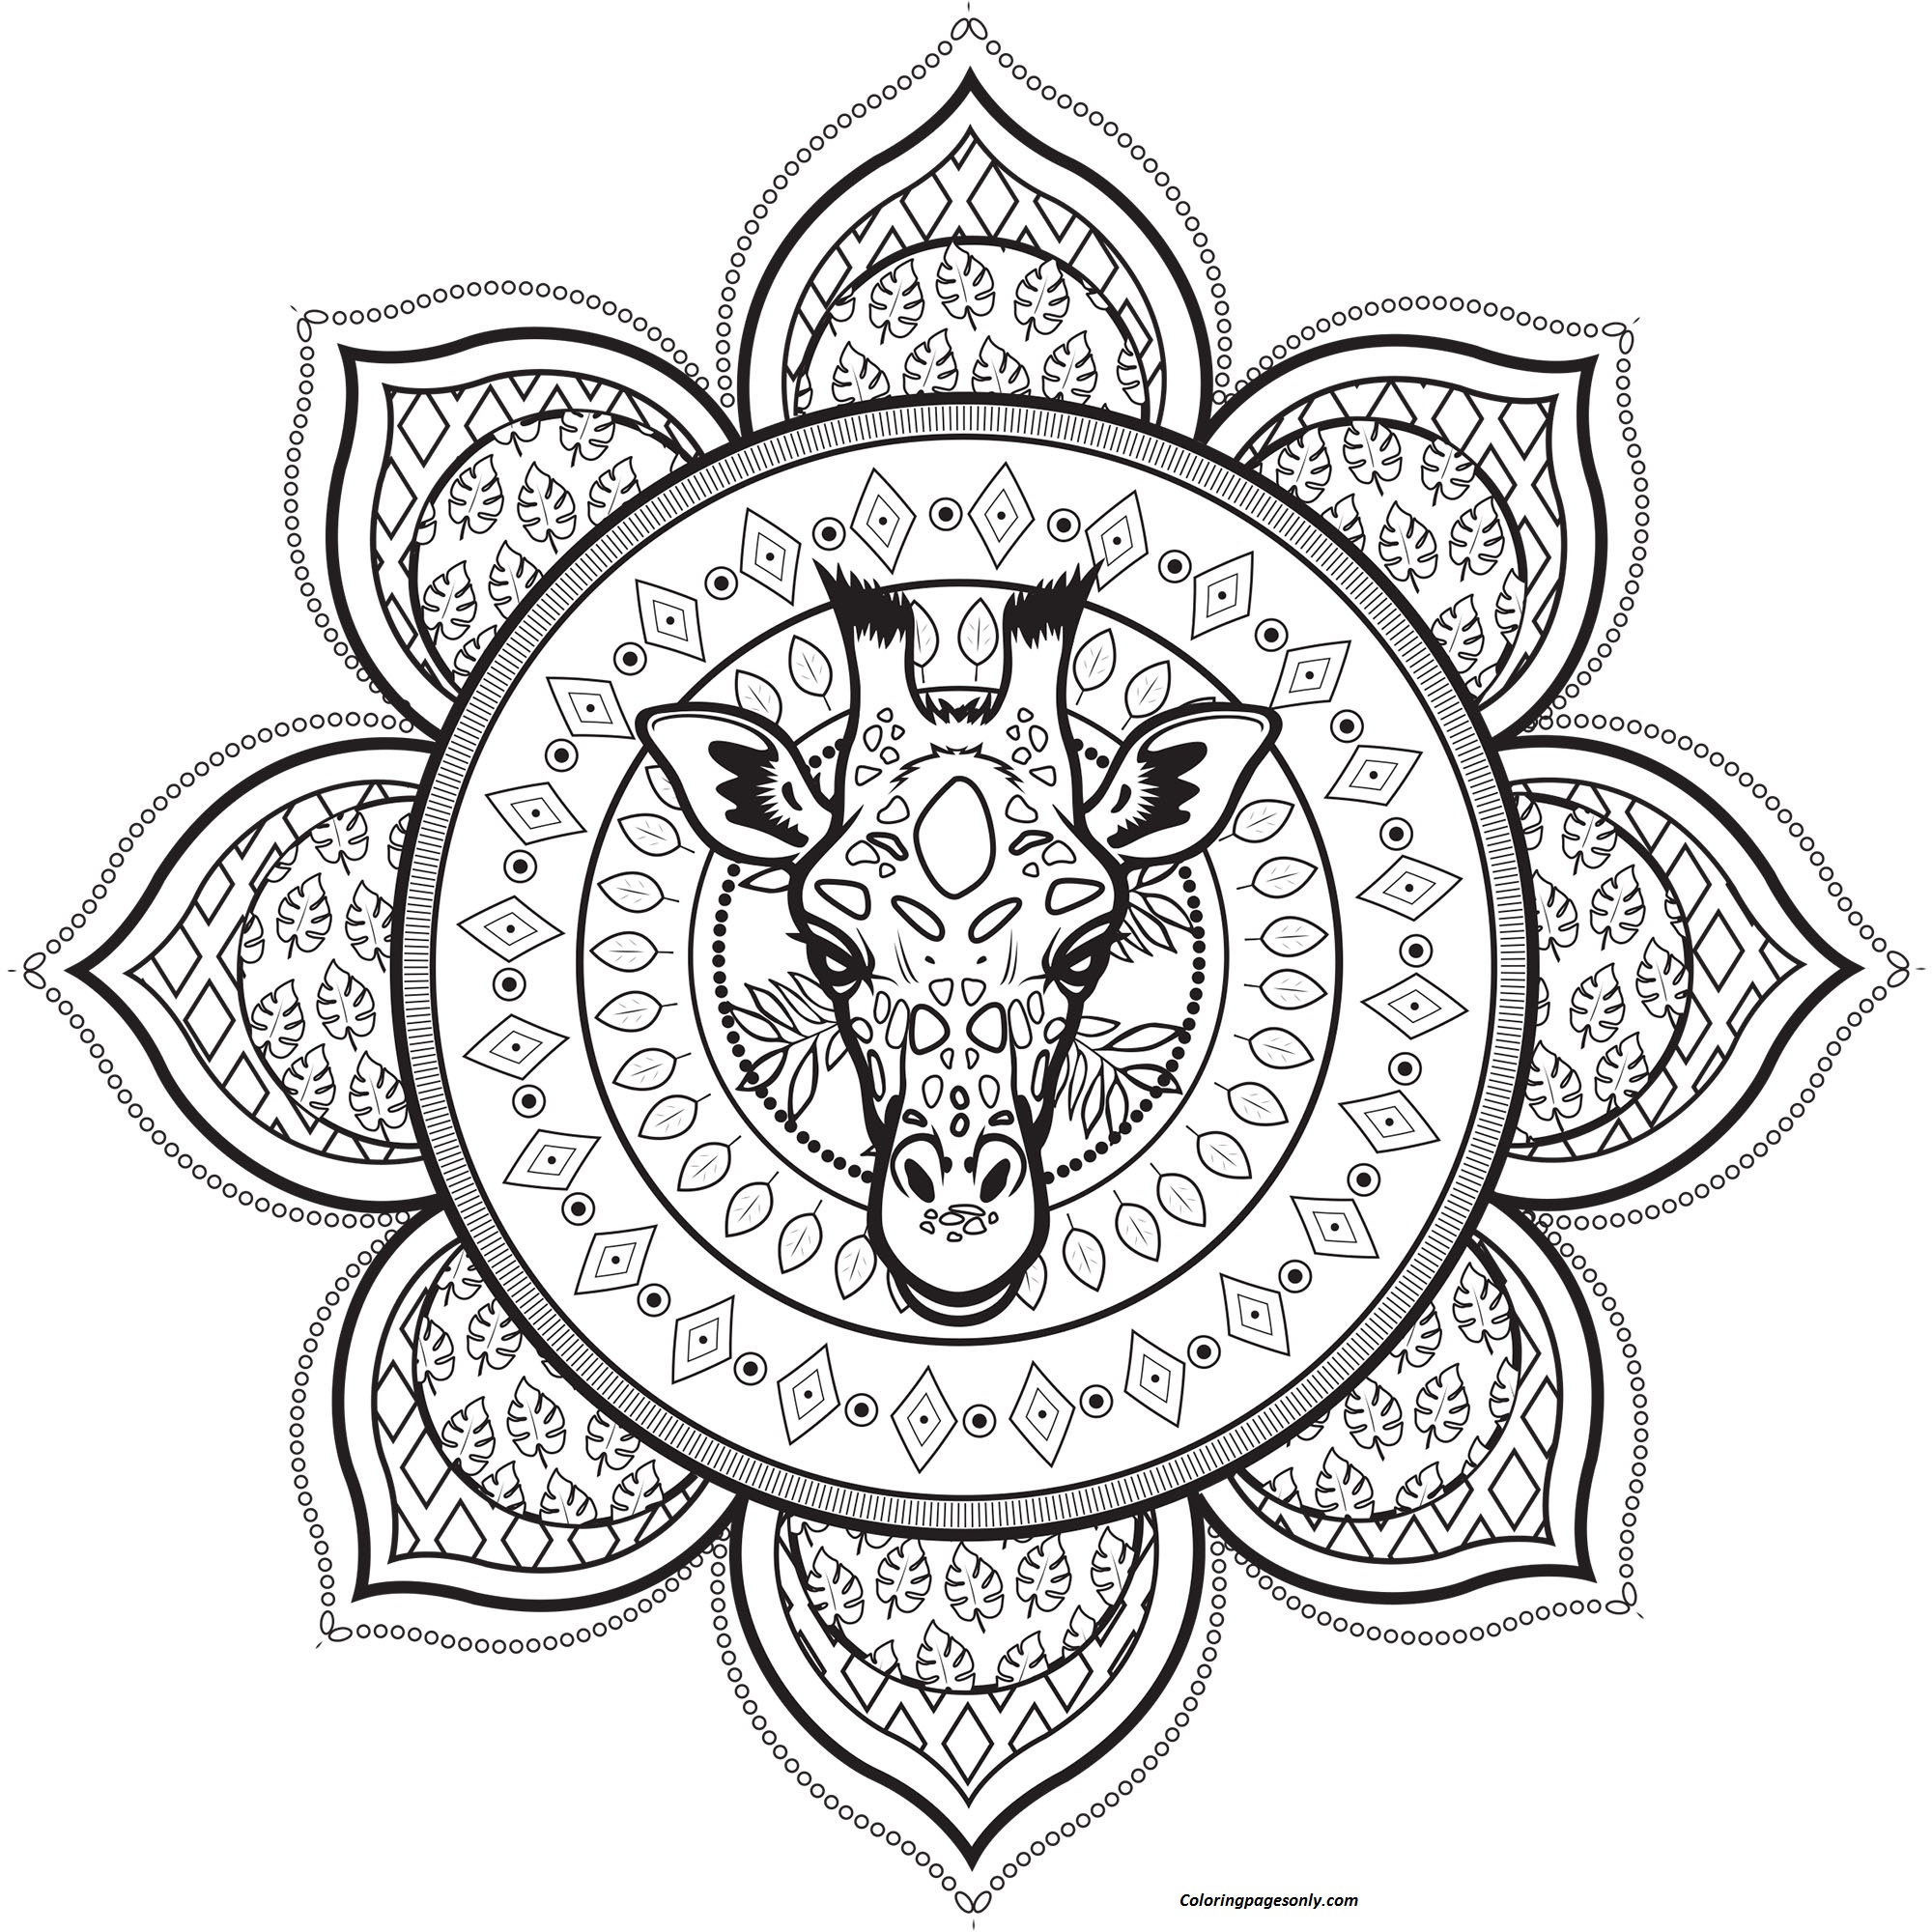 Download Mandala With A Giraffe Coloring Page - Free Coloring Pages ...